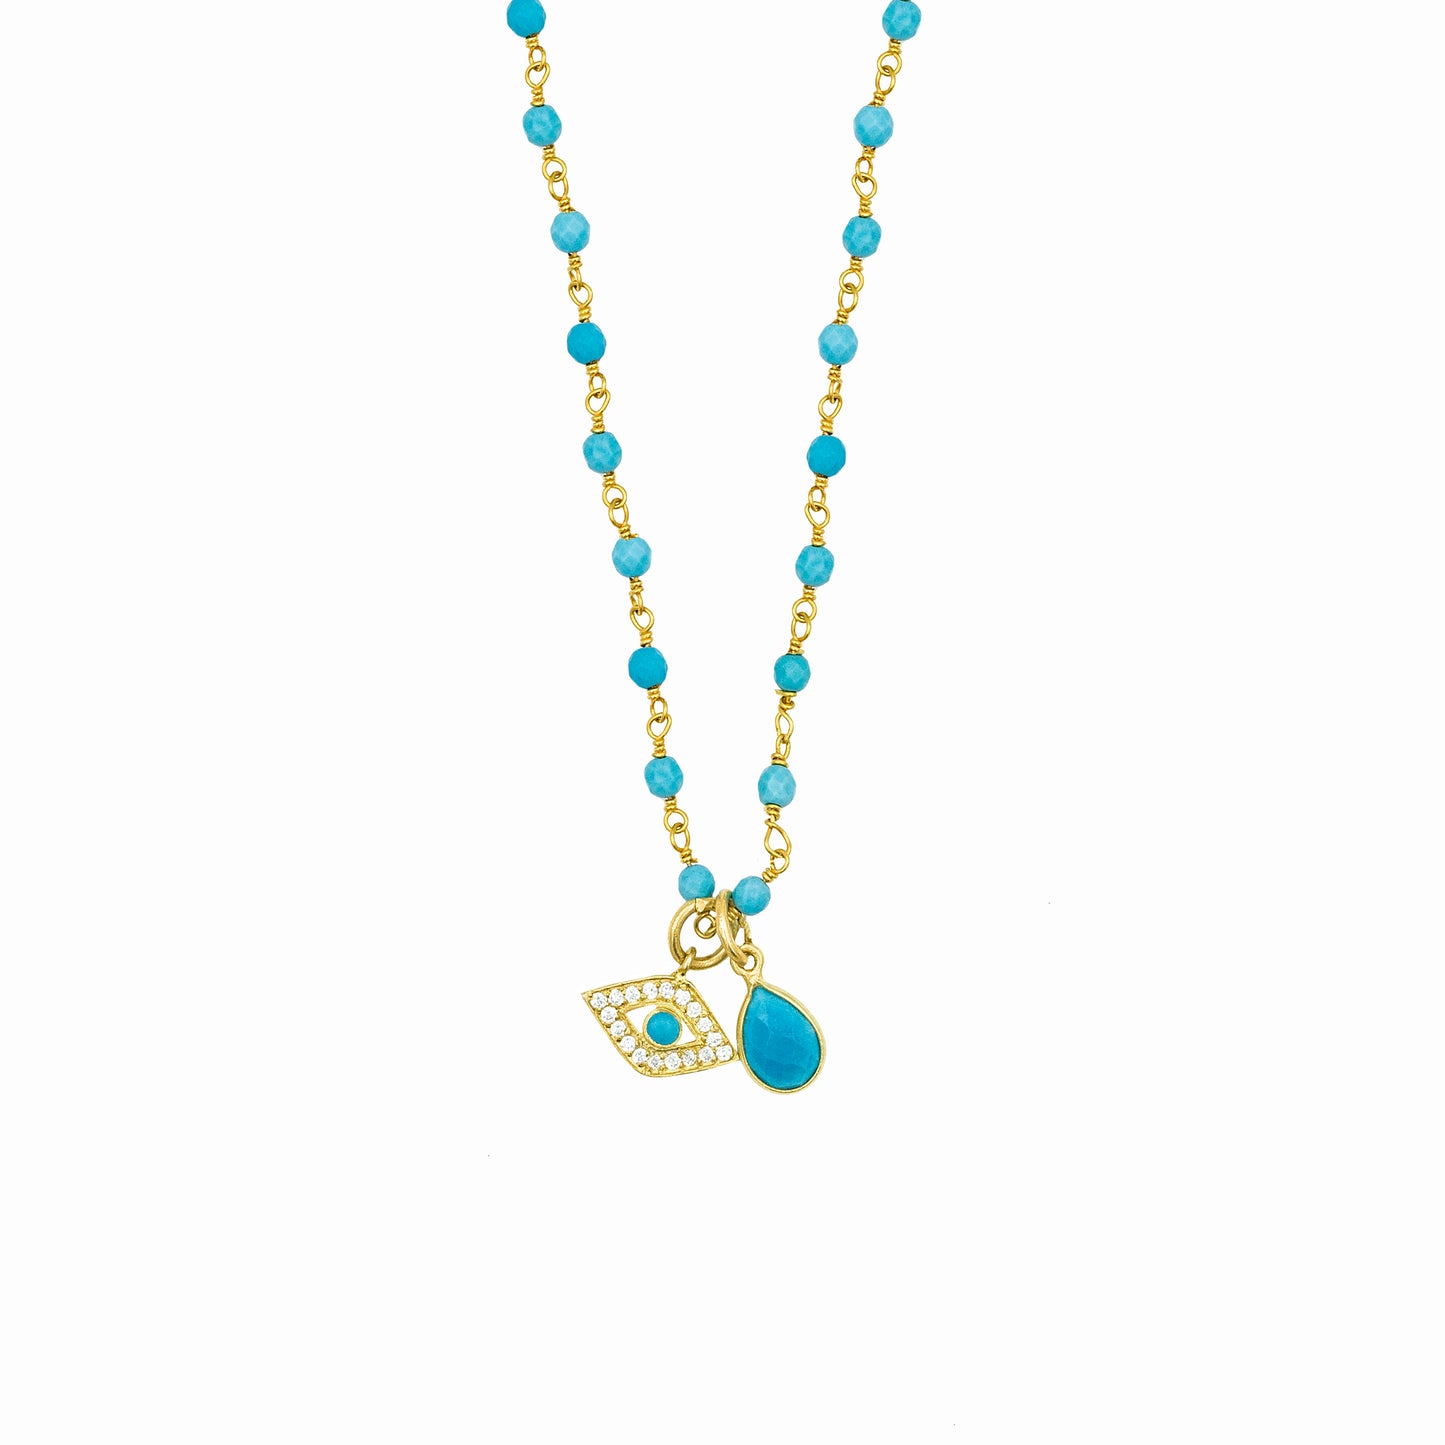 Third Eye Charm Gemstone Vermeil Necklace for Protection